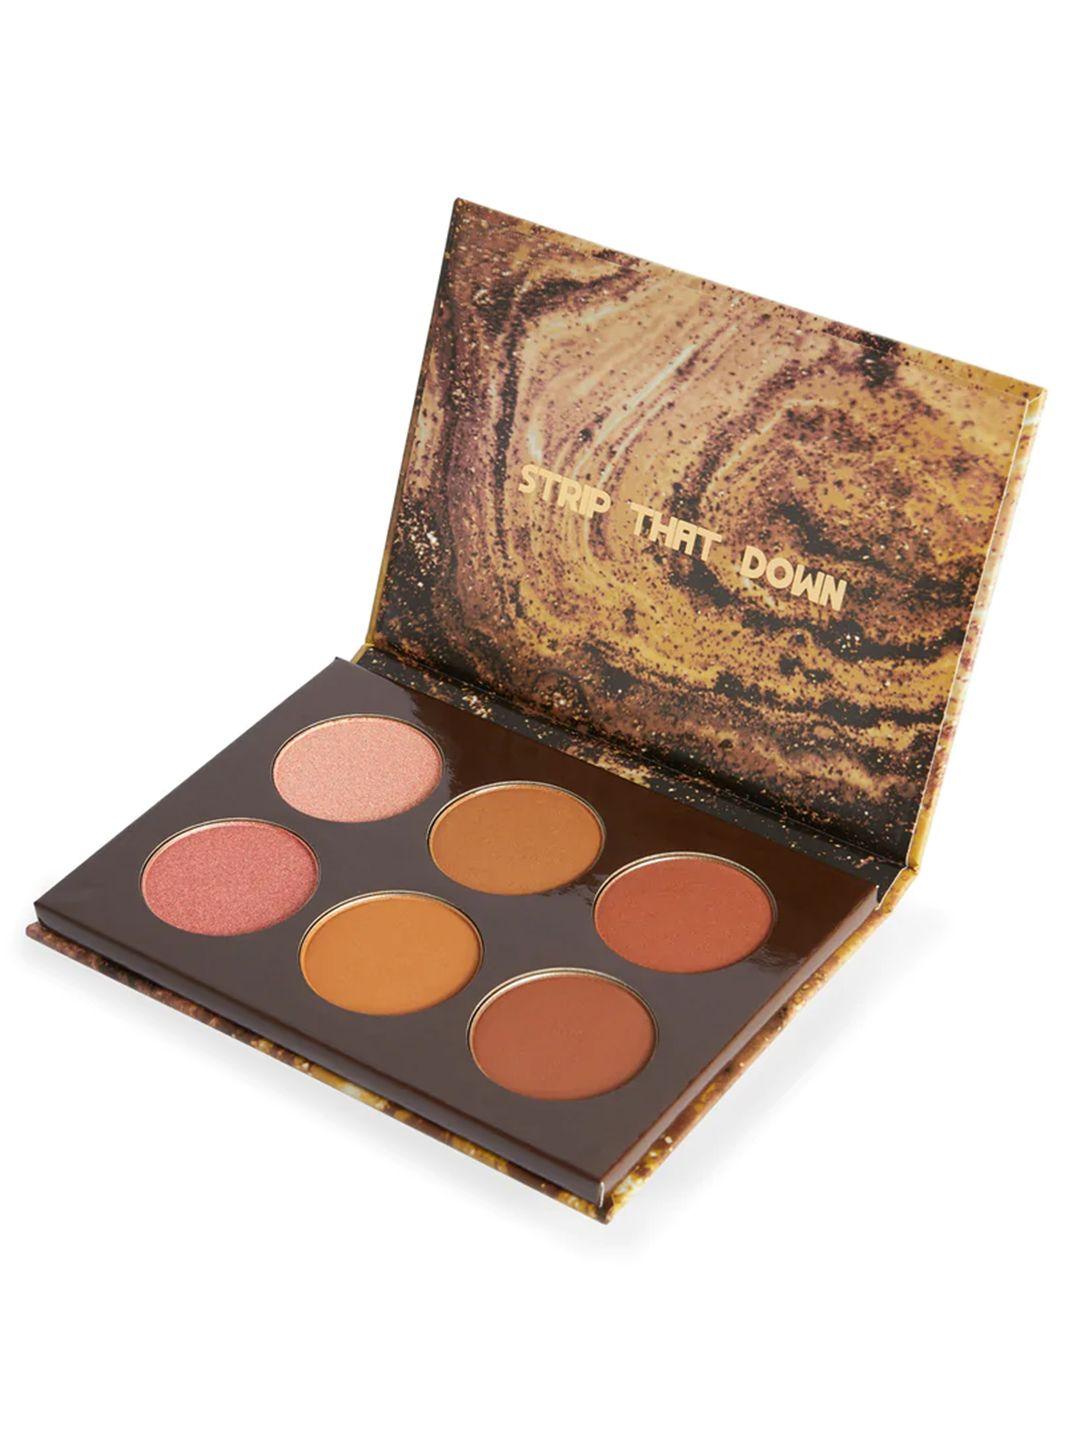 bh cosmetics in the buff all-in-one face palette 15g - light/medium